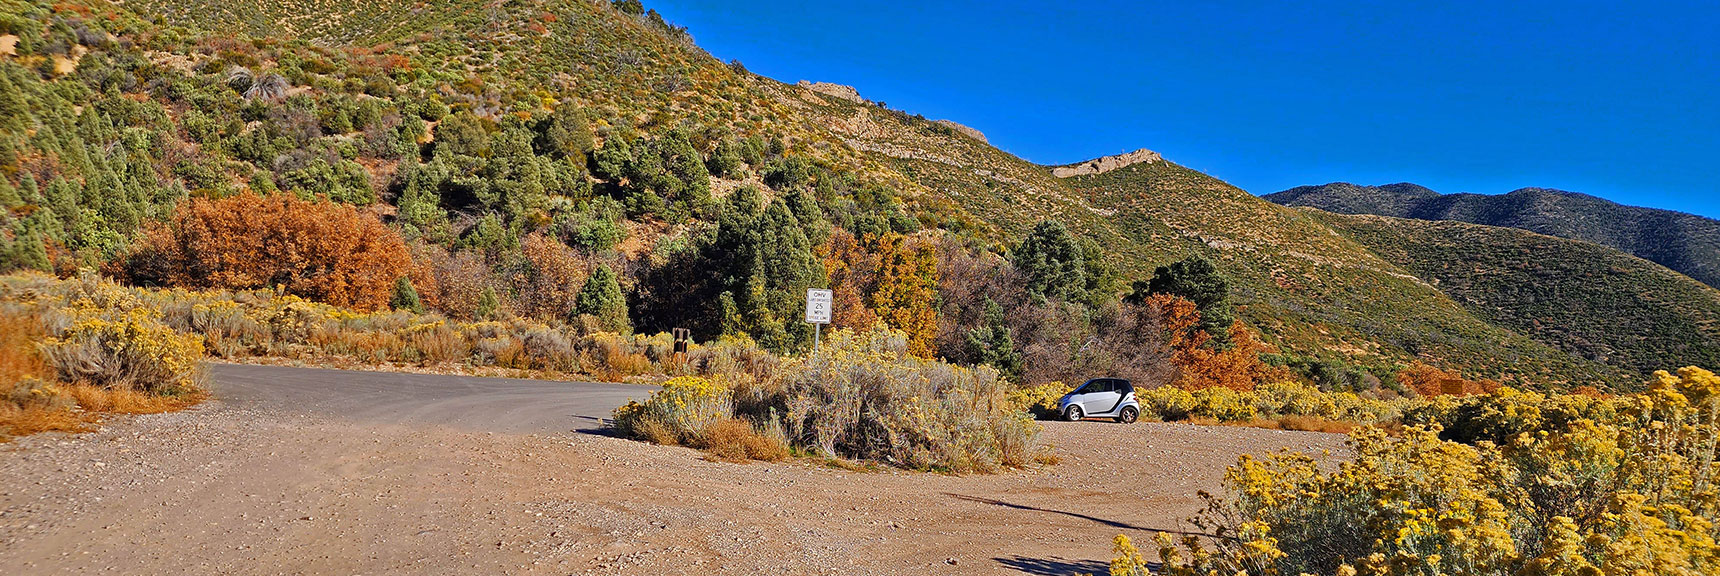 Return to "The Beast" Parked at Upper End of Lovell Canyon Road. | Lovell Canyon Loop Trail | Lovell Canyon Nevada